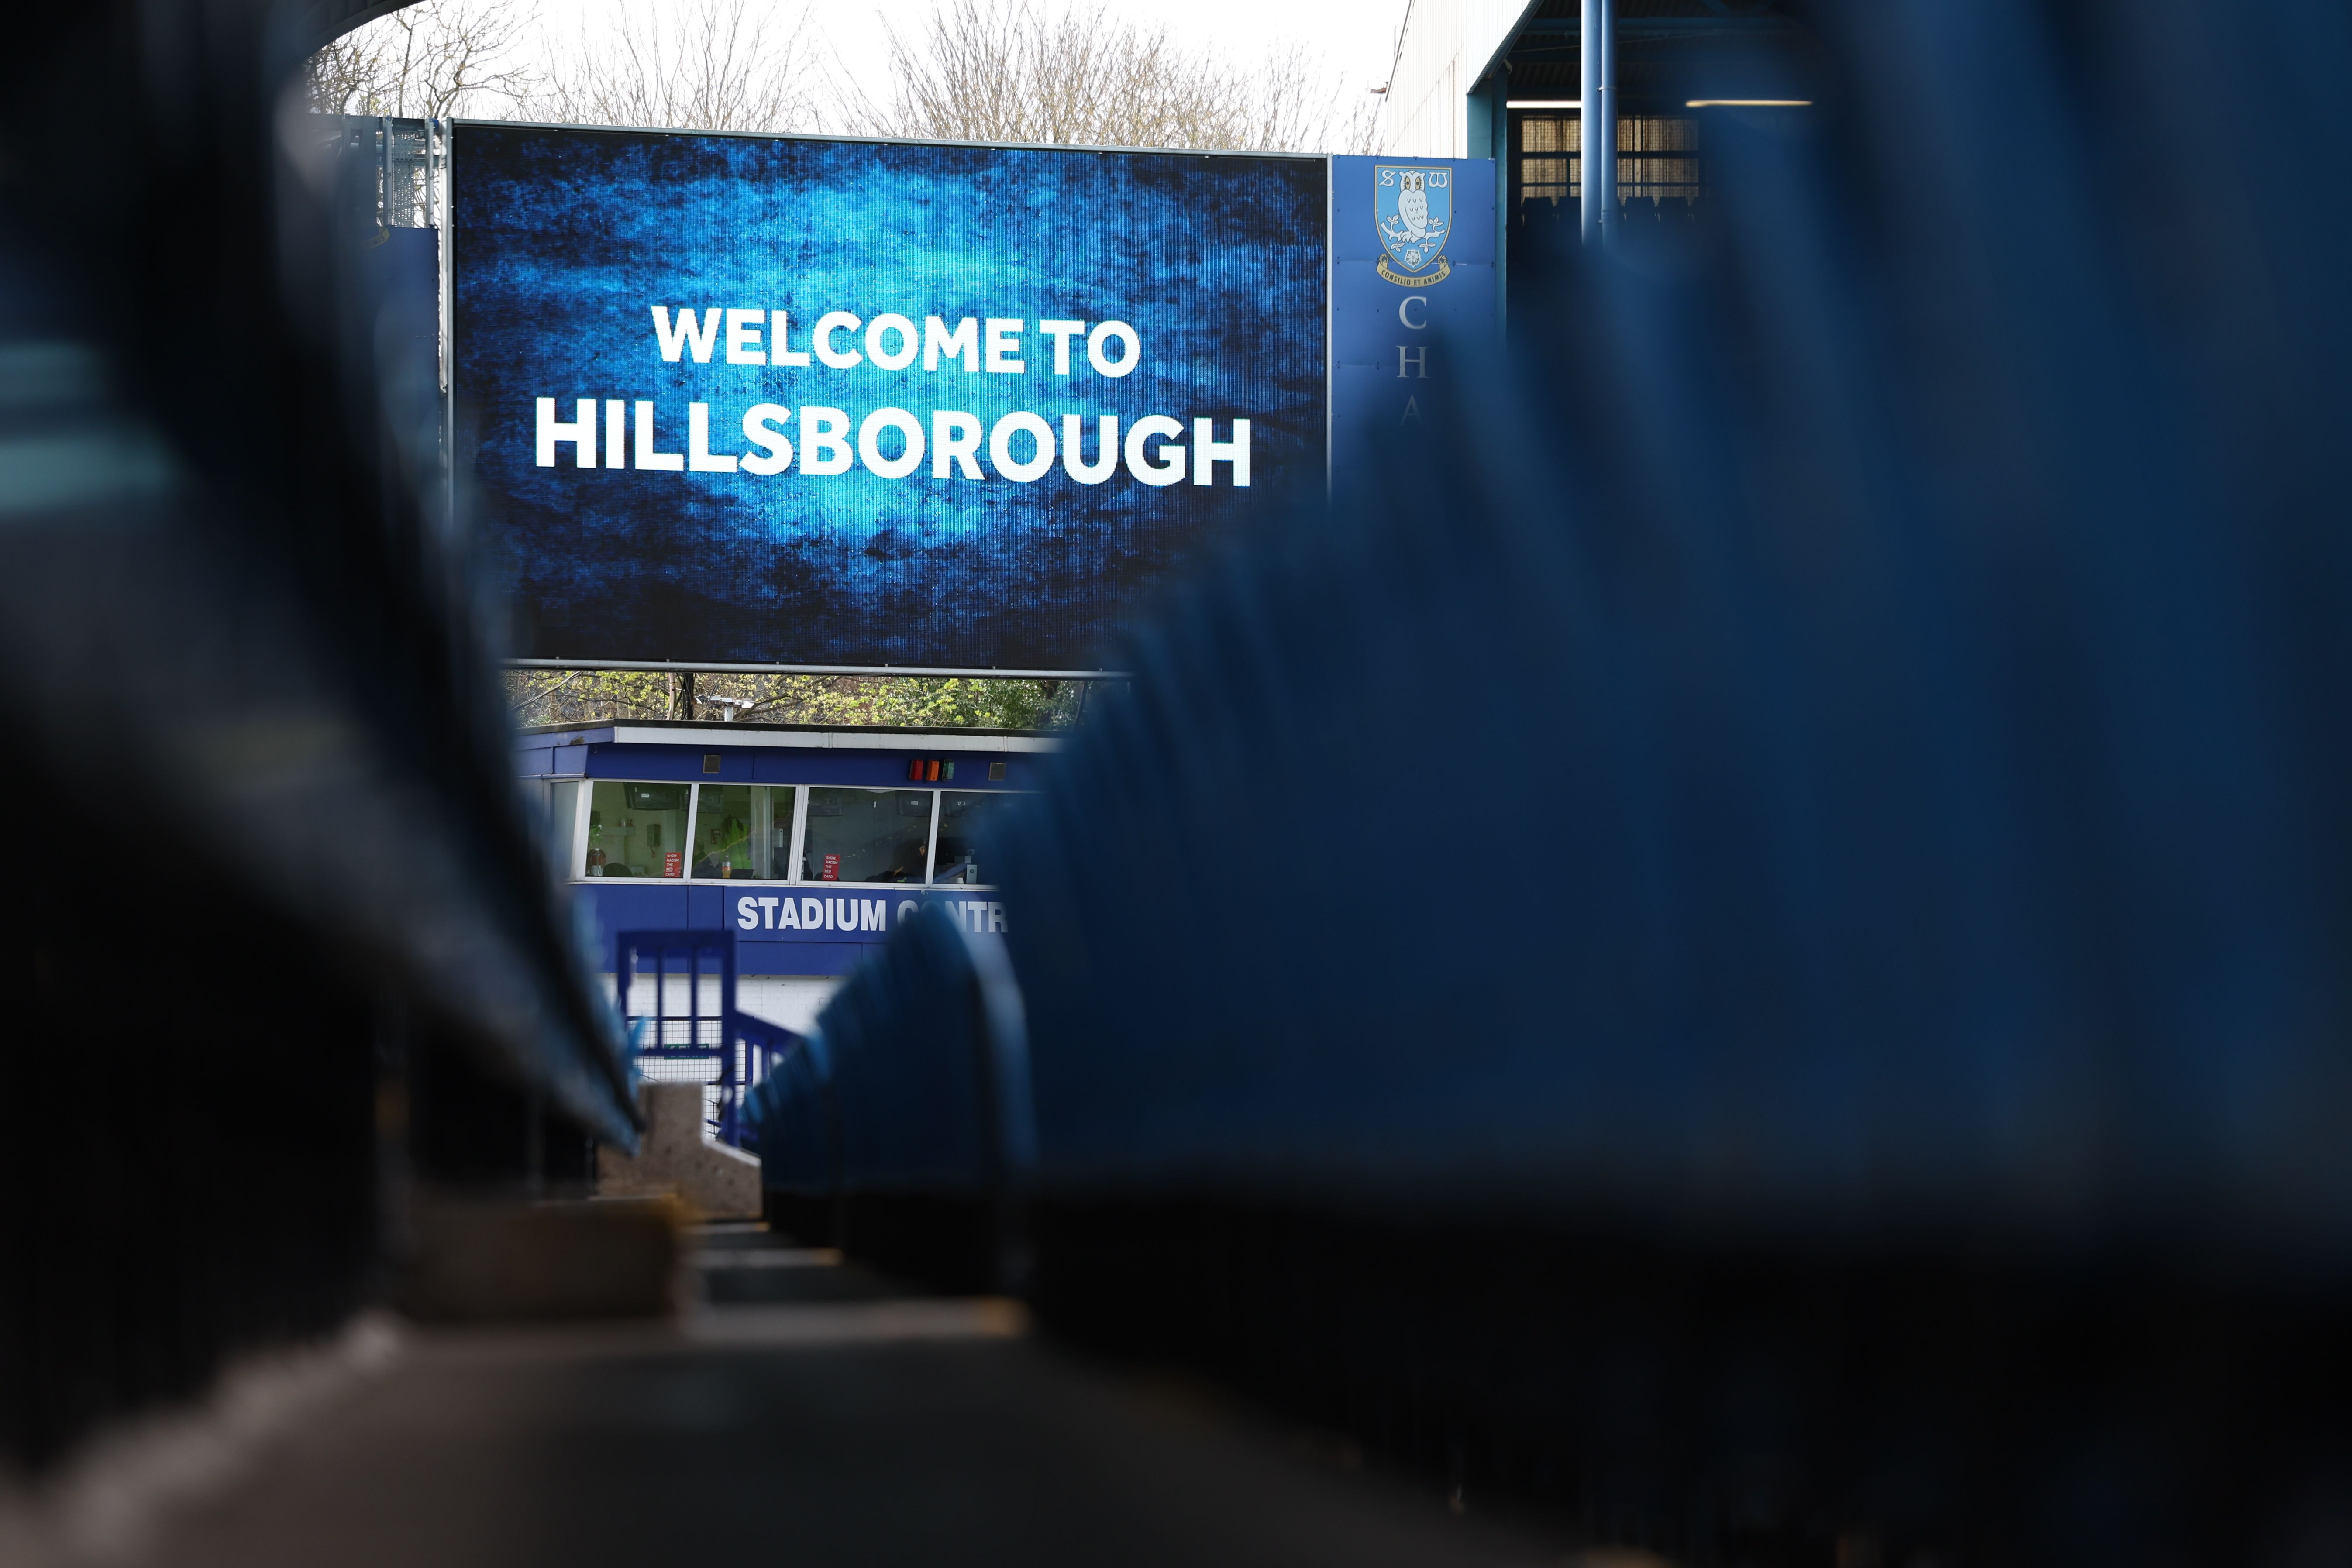 A general view of the big screen at Hillsborough with the words welcome to Hillsborough written on it